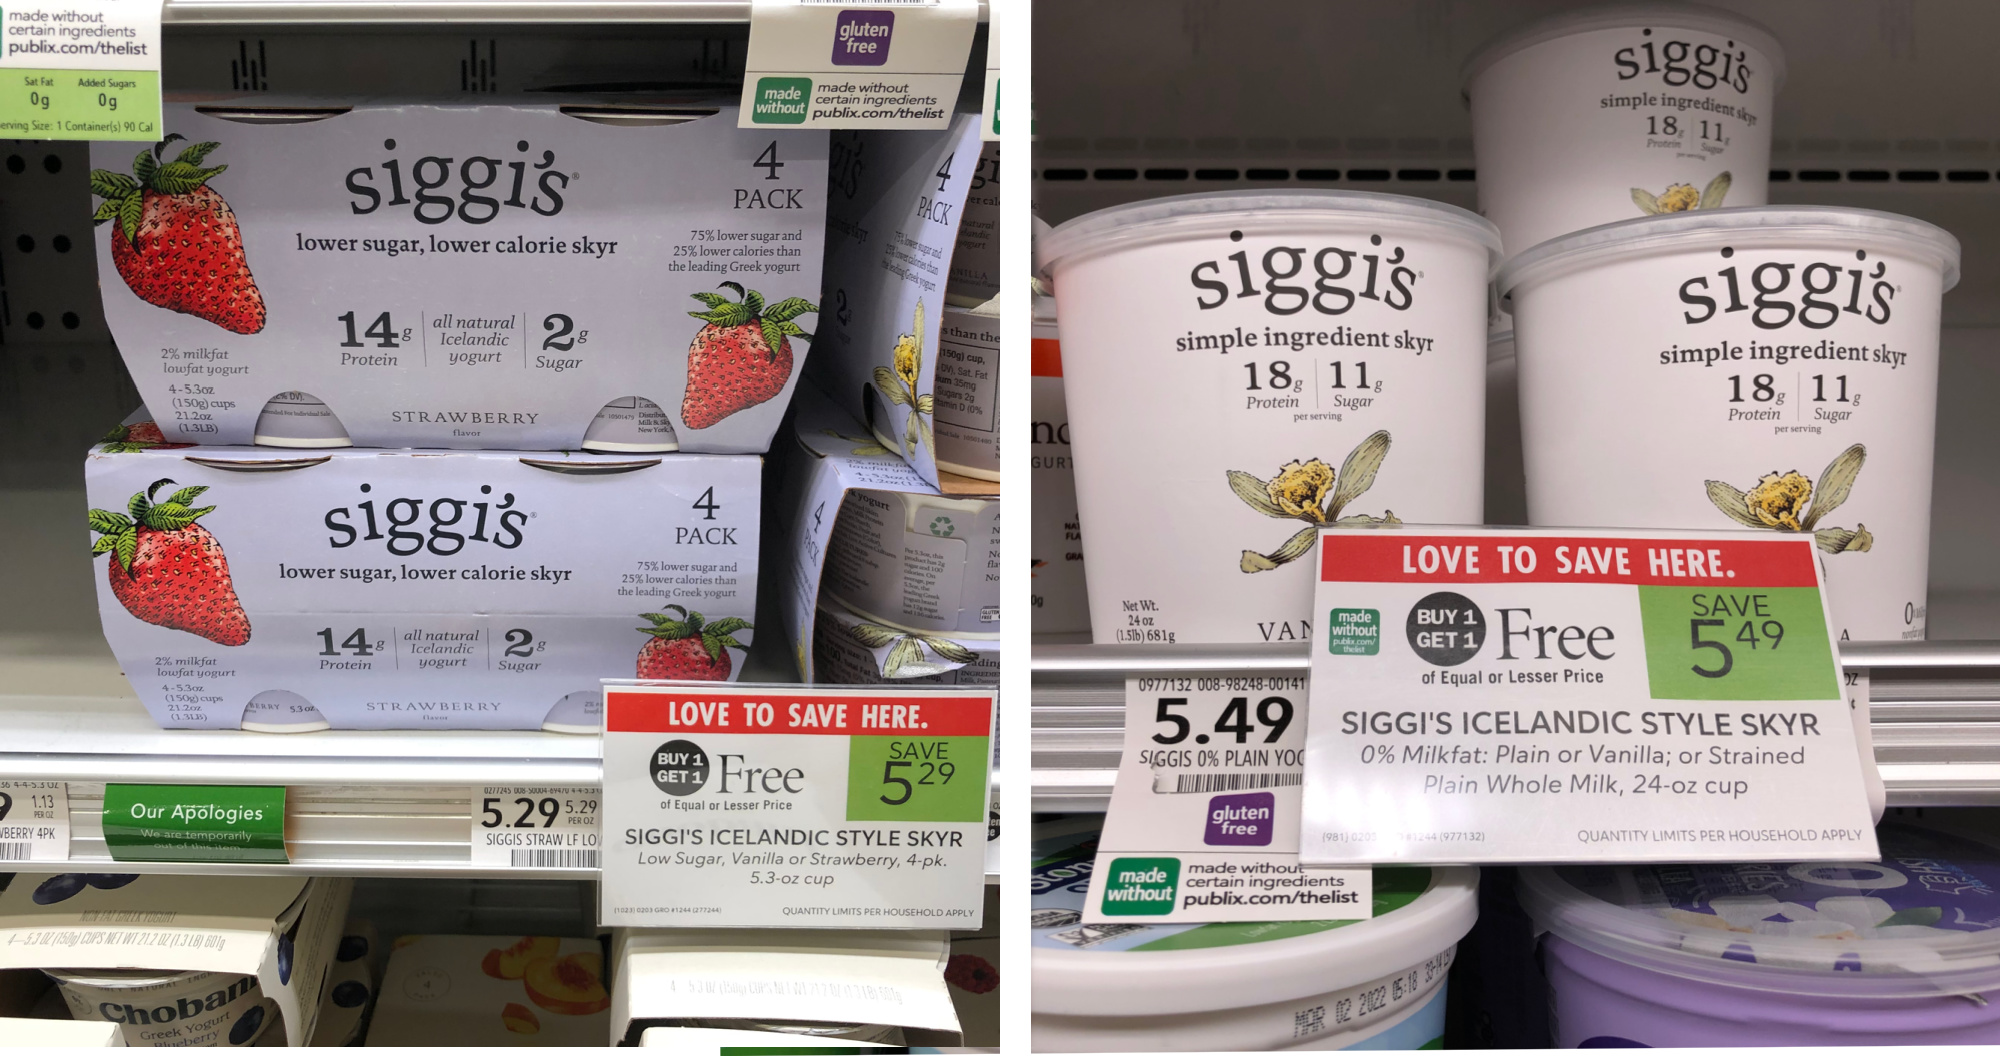 Siggi’s Icelandic Style Skyr 4-Pack As Low As $1.65 At Publix For Some - ENDS Today! on I Heart Publix 1